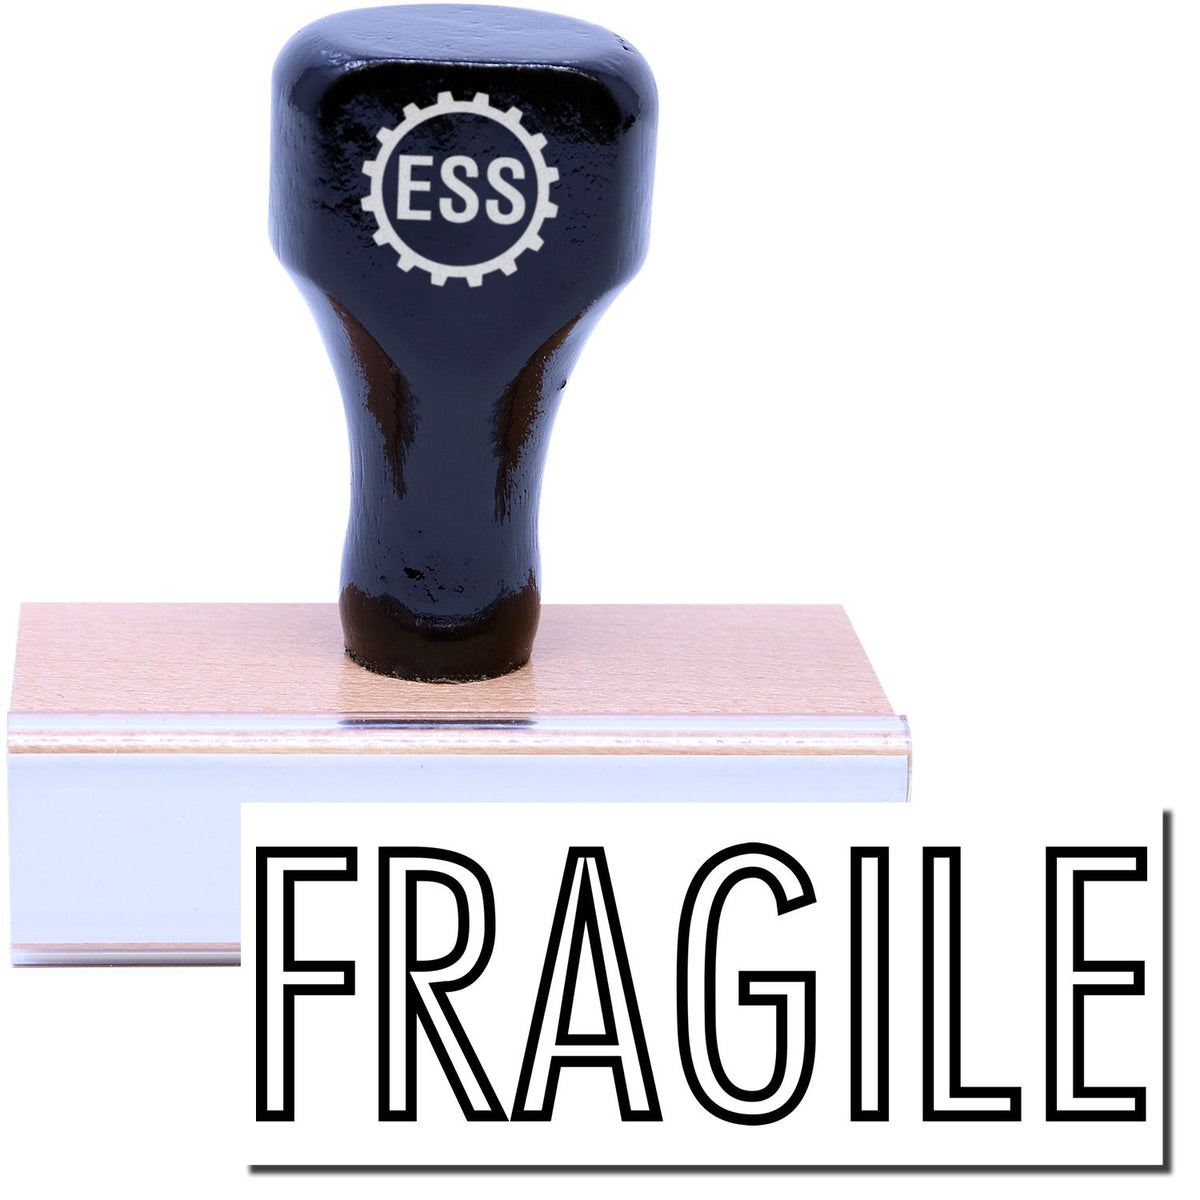 A stock office rubber stamp with a stamped image showing how the text &quot;FRAGILE&quot; in a large outline font is displayed after stamping.